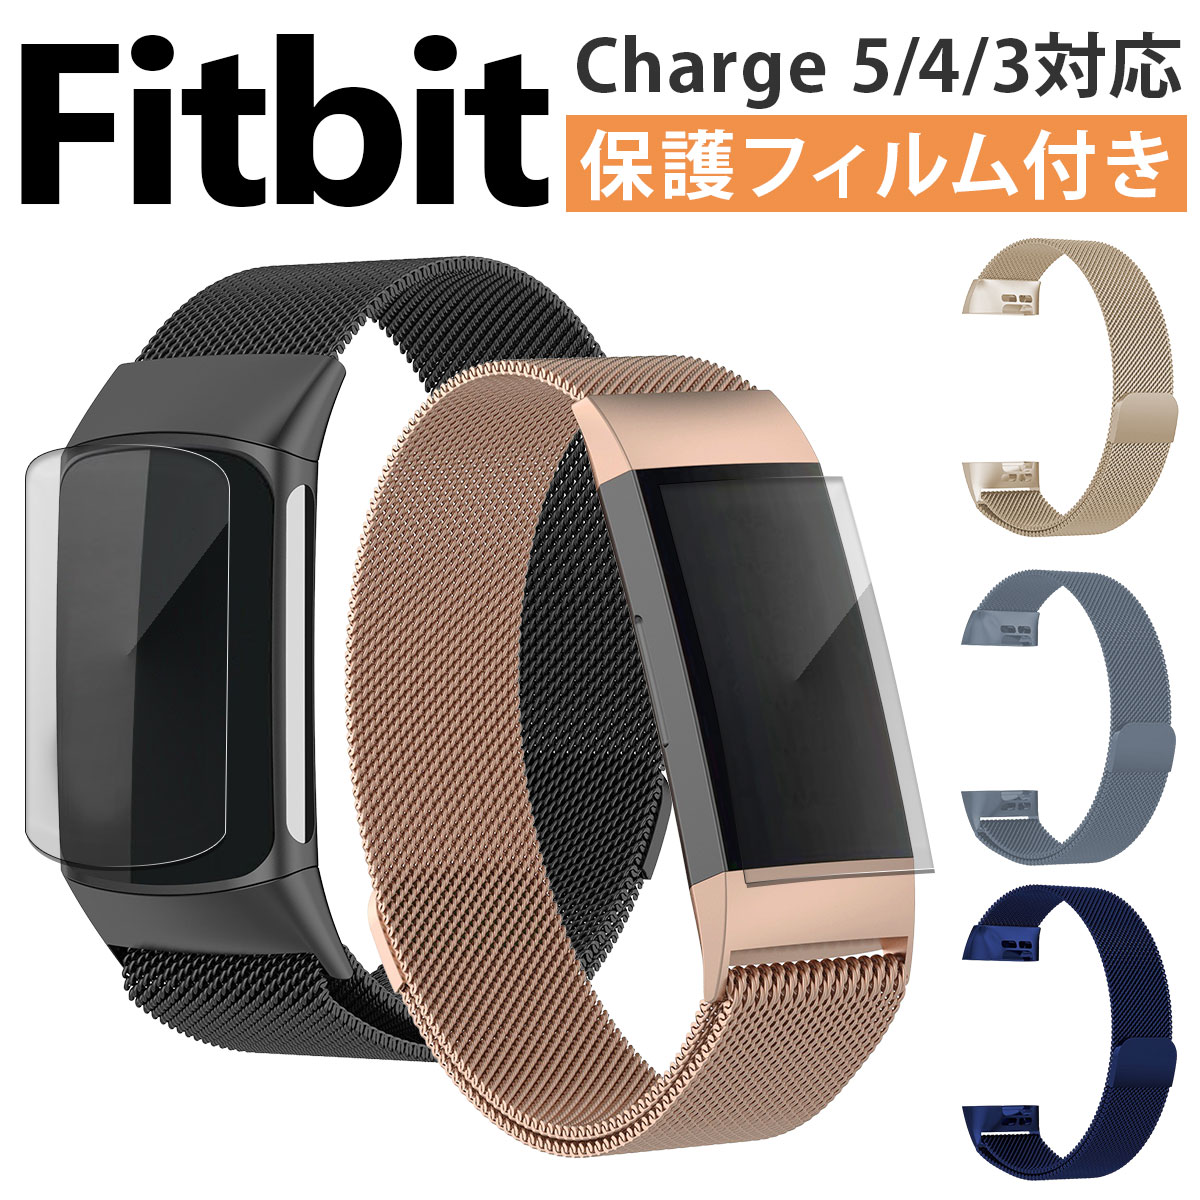 Fitbit charge charge charge 交換 バンド ステンレス フィットビット チャージ5 チャージ4 チャージ3 対応  互換品 金属 保護フィルム カバー セット :d825:いいひ 店  